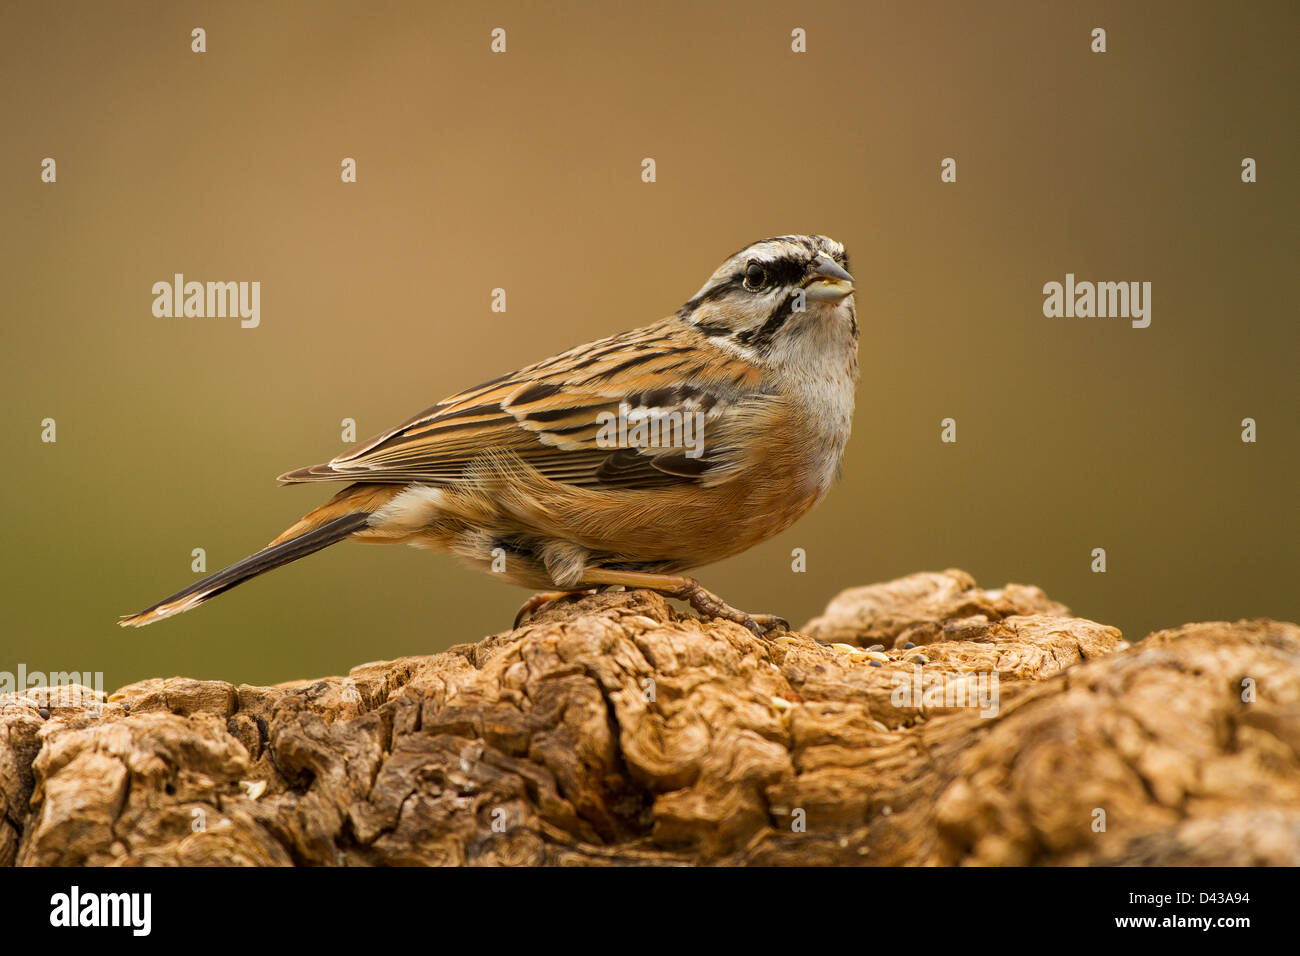 The Rock bunting bird over a log and looking Stock Photo